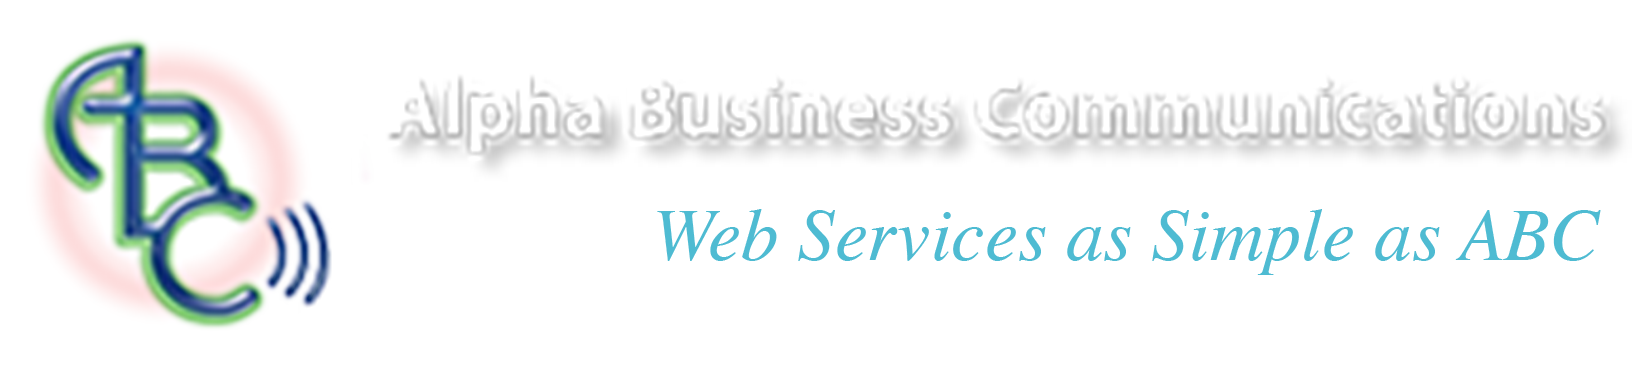 Alpha Business Communications Website and Marketing